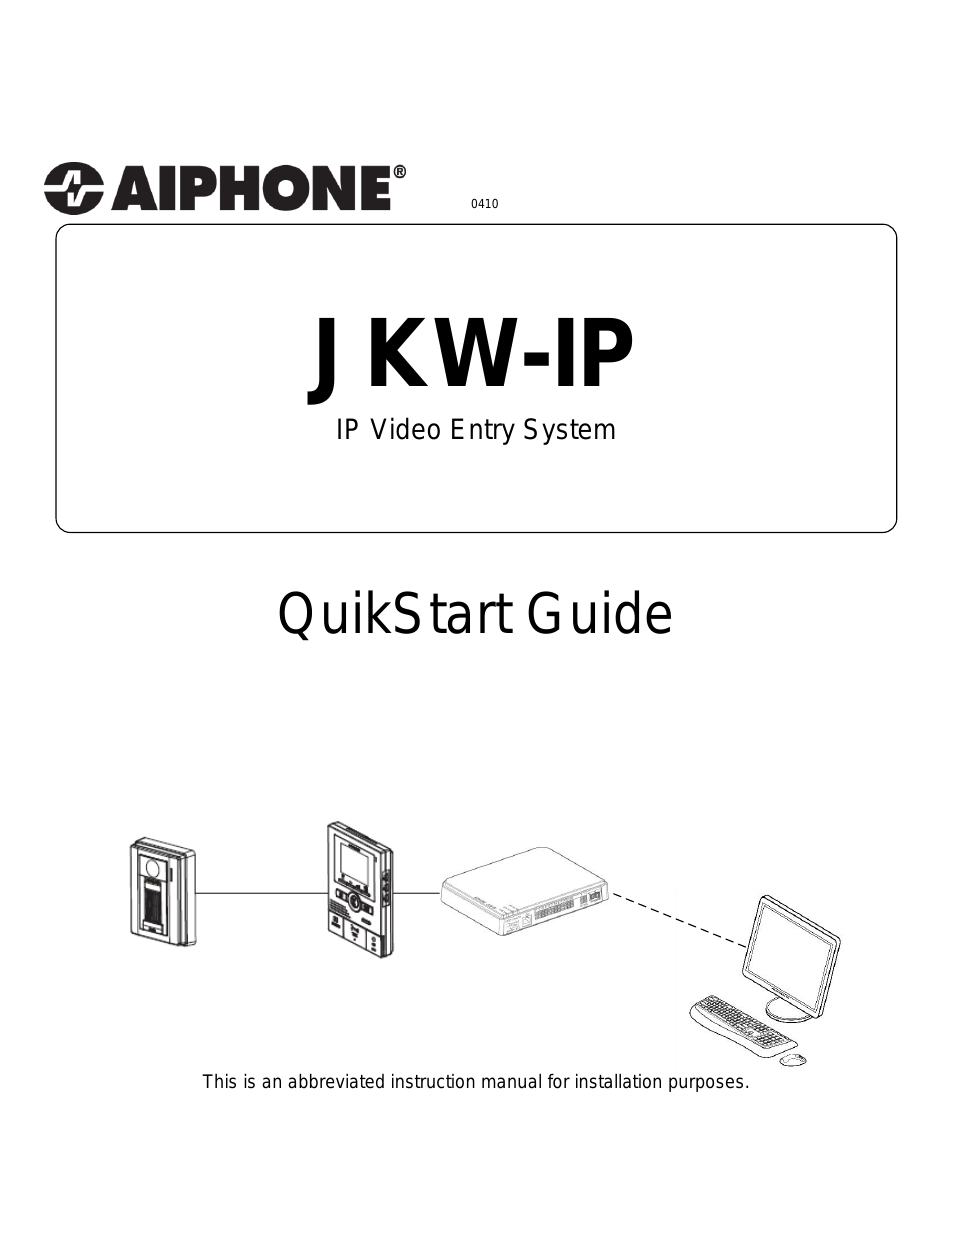 VIDEO ENTRY SYSTEM JKW-IP